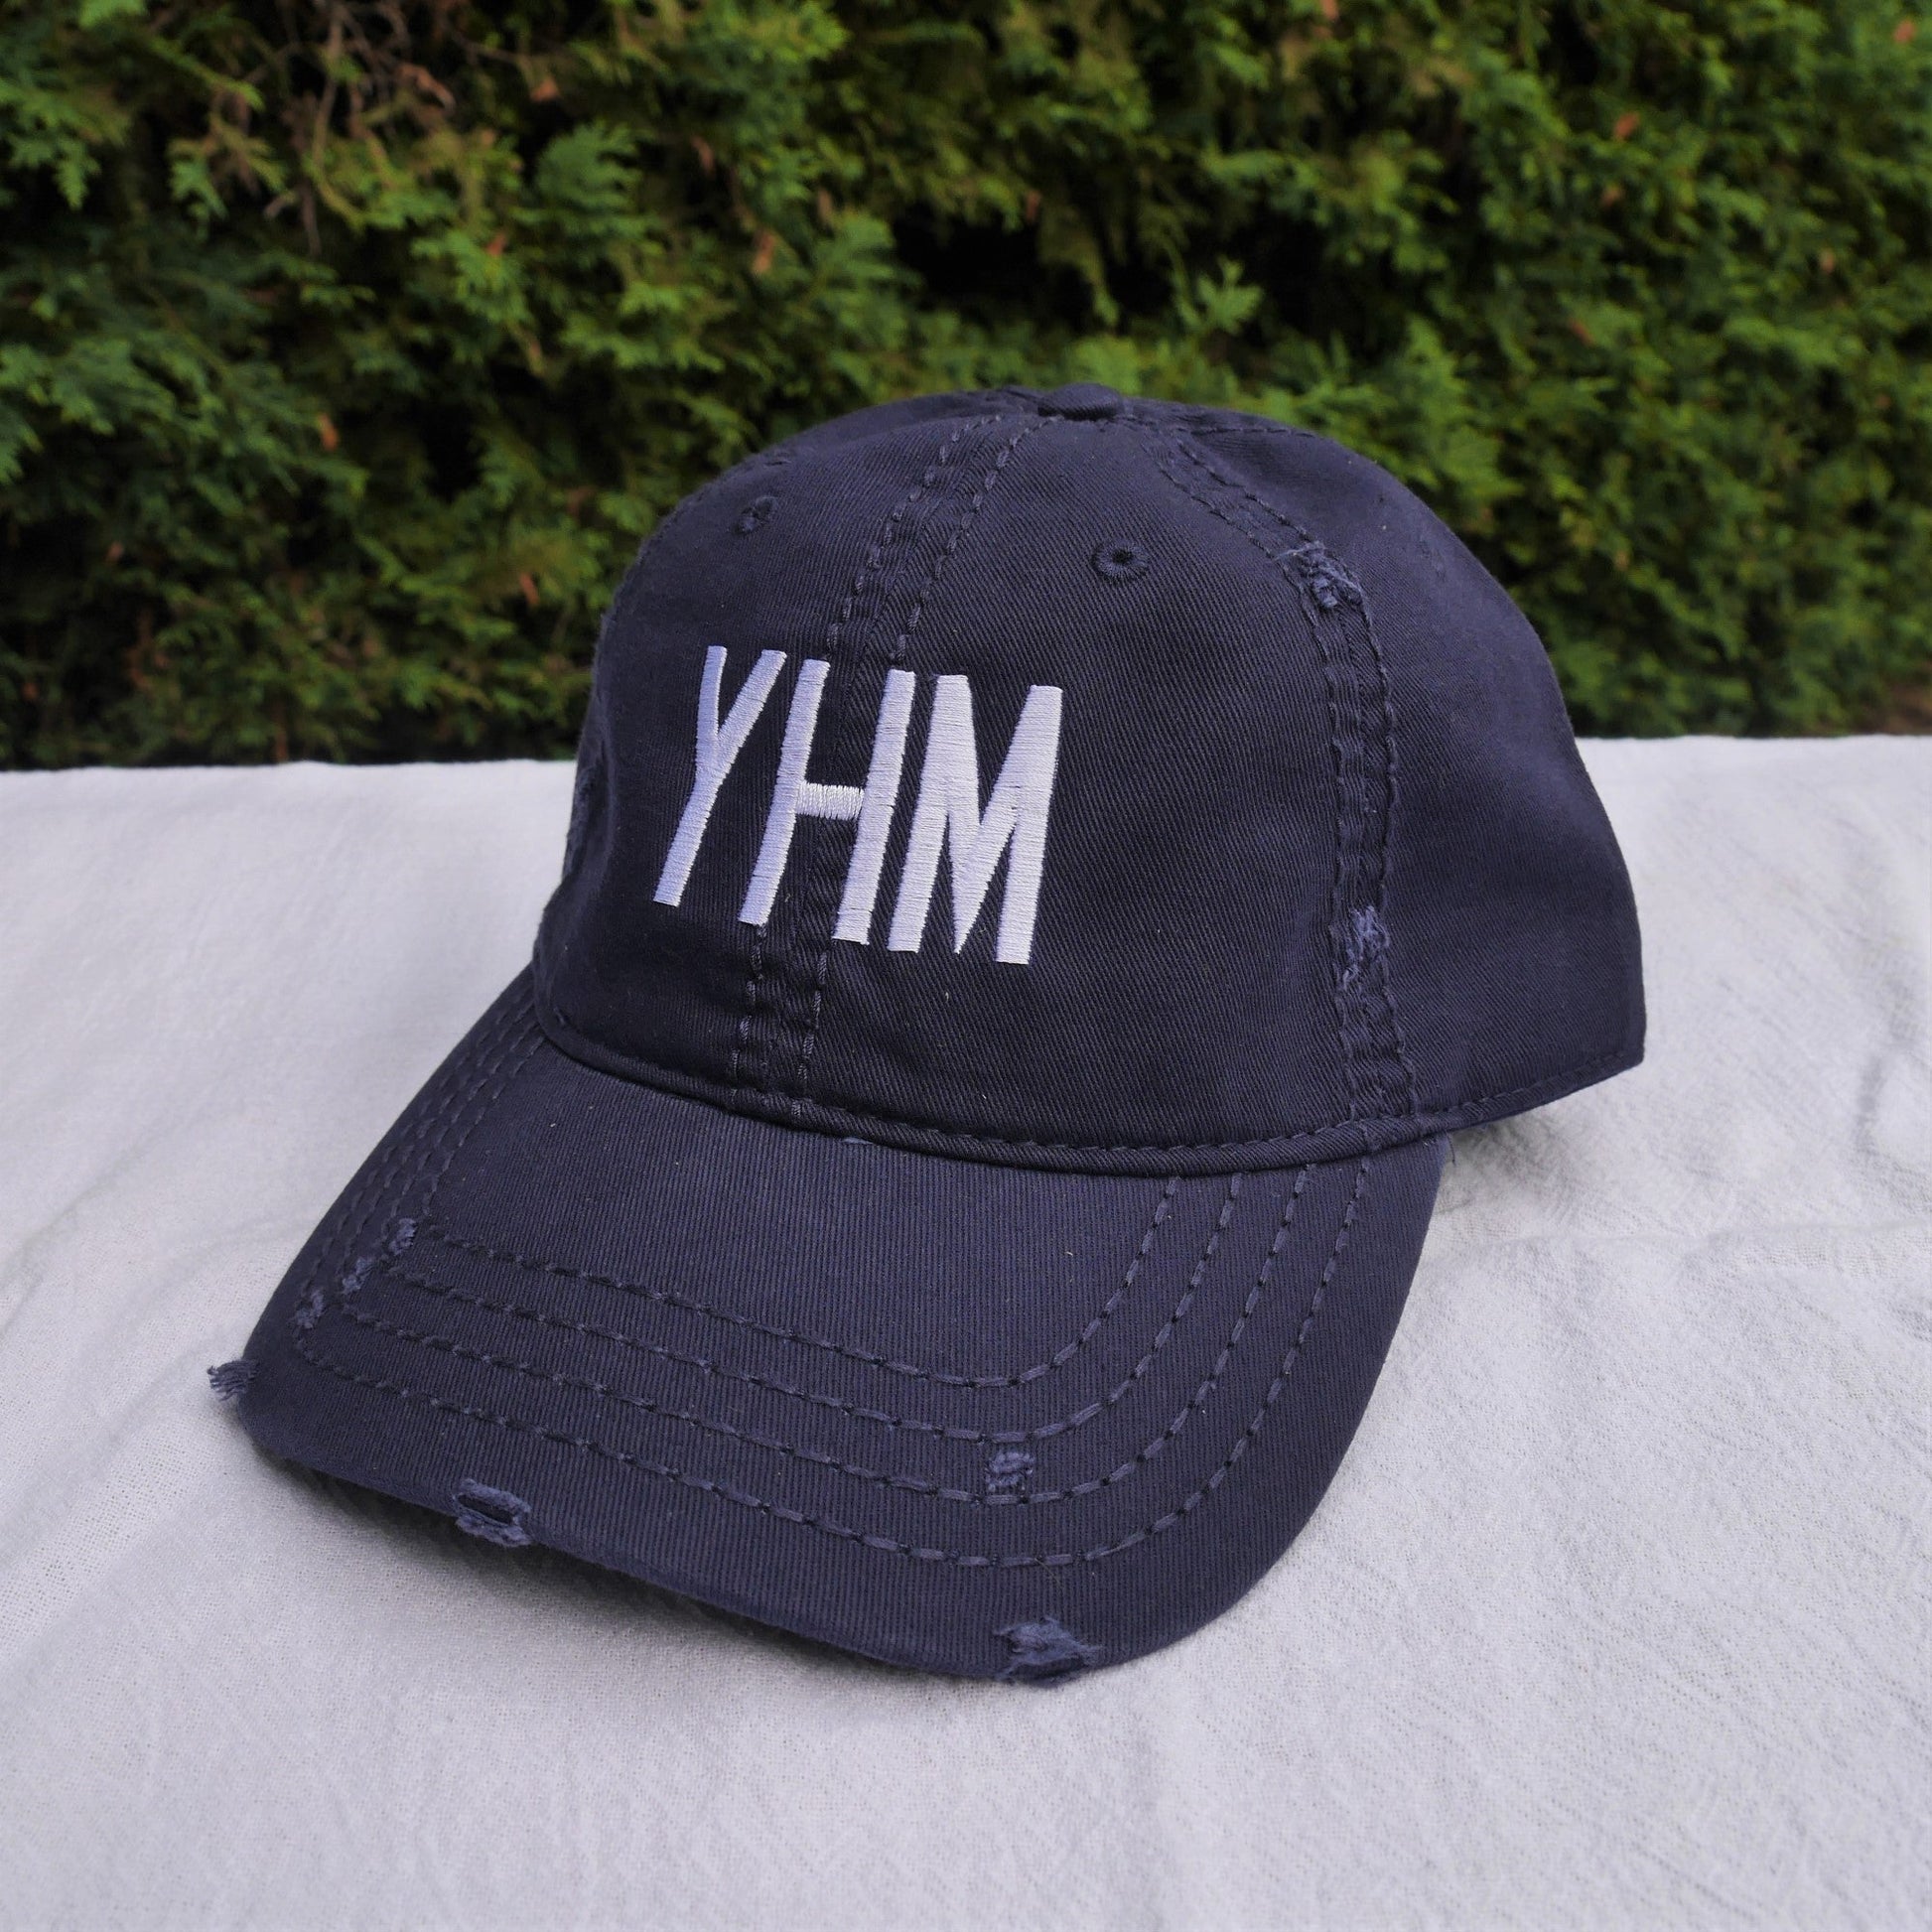 Airport Code Baseball Cap - White • EZE Buenos Aires • YHM Designs - Image 31